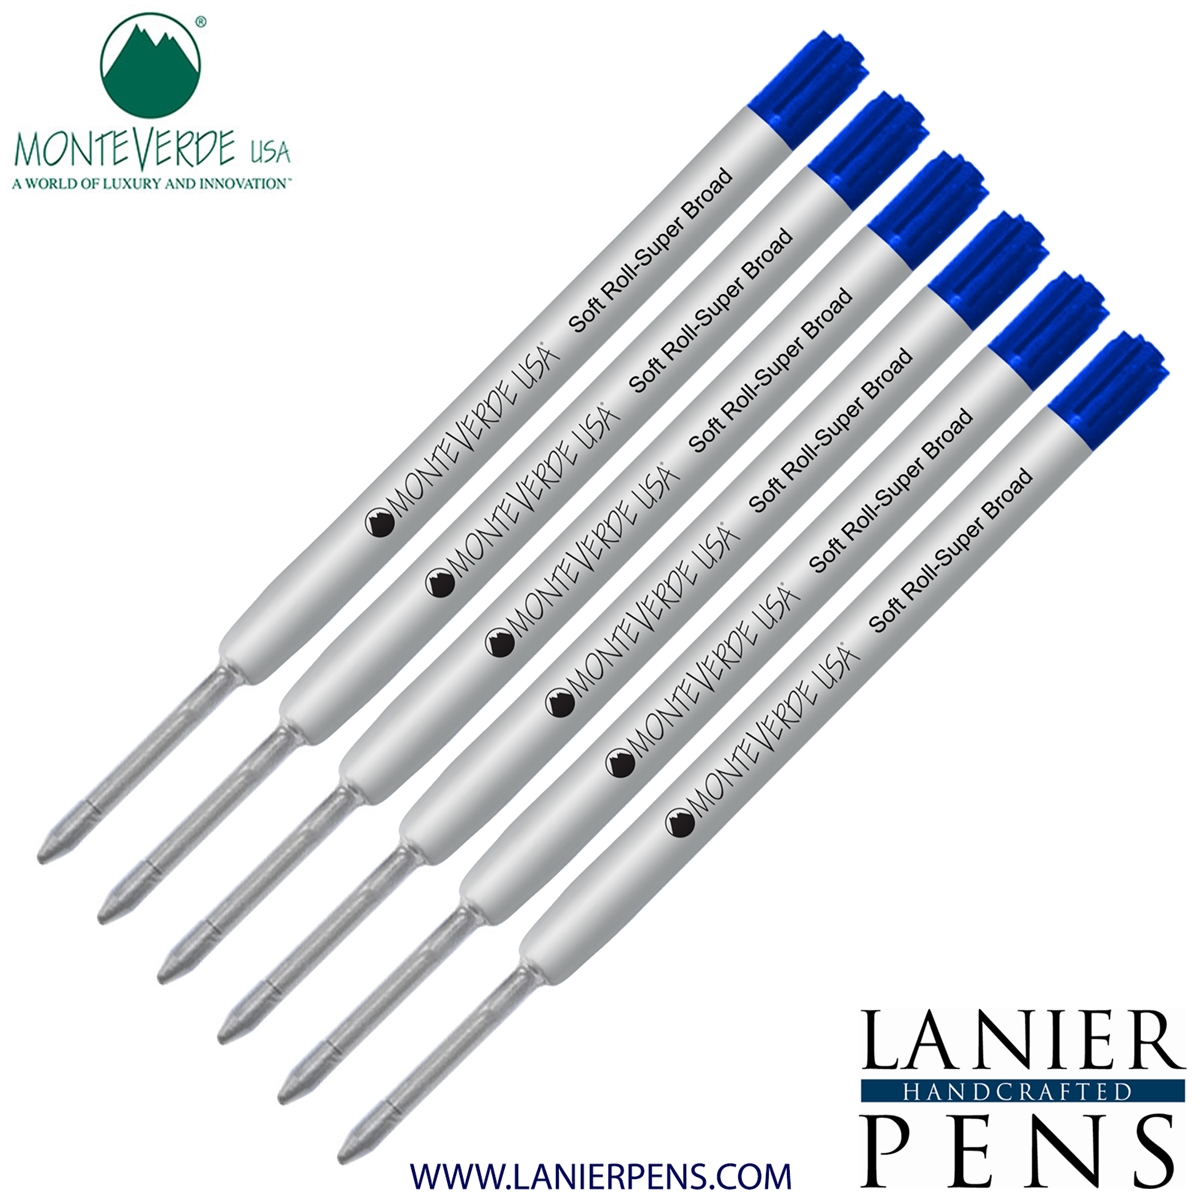 6 Pack - Monteverde Soft Roll Super Broad Ballpoint P15 Paste Ink Refill Compatible with most Parker Style Ballpoint Pens - Blue (Super Broad Tip 1.4mm) - Lanier Pens